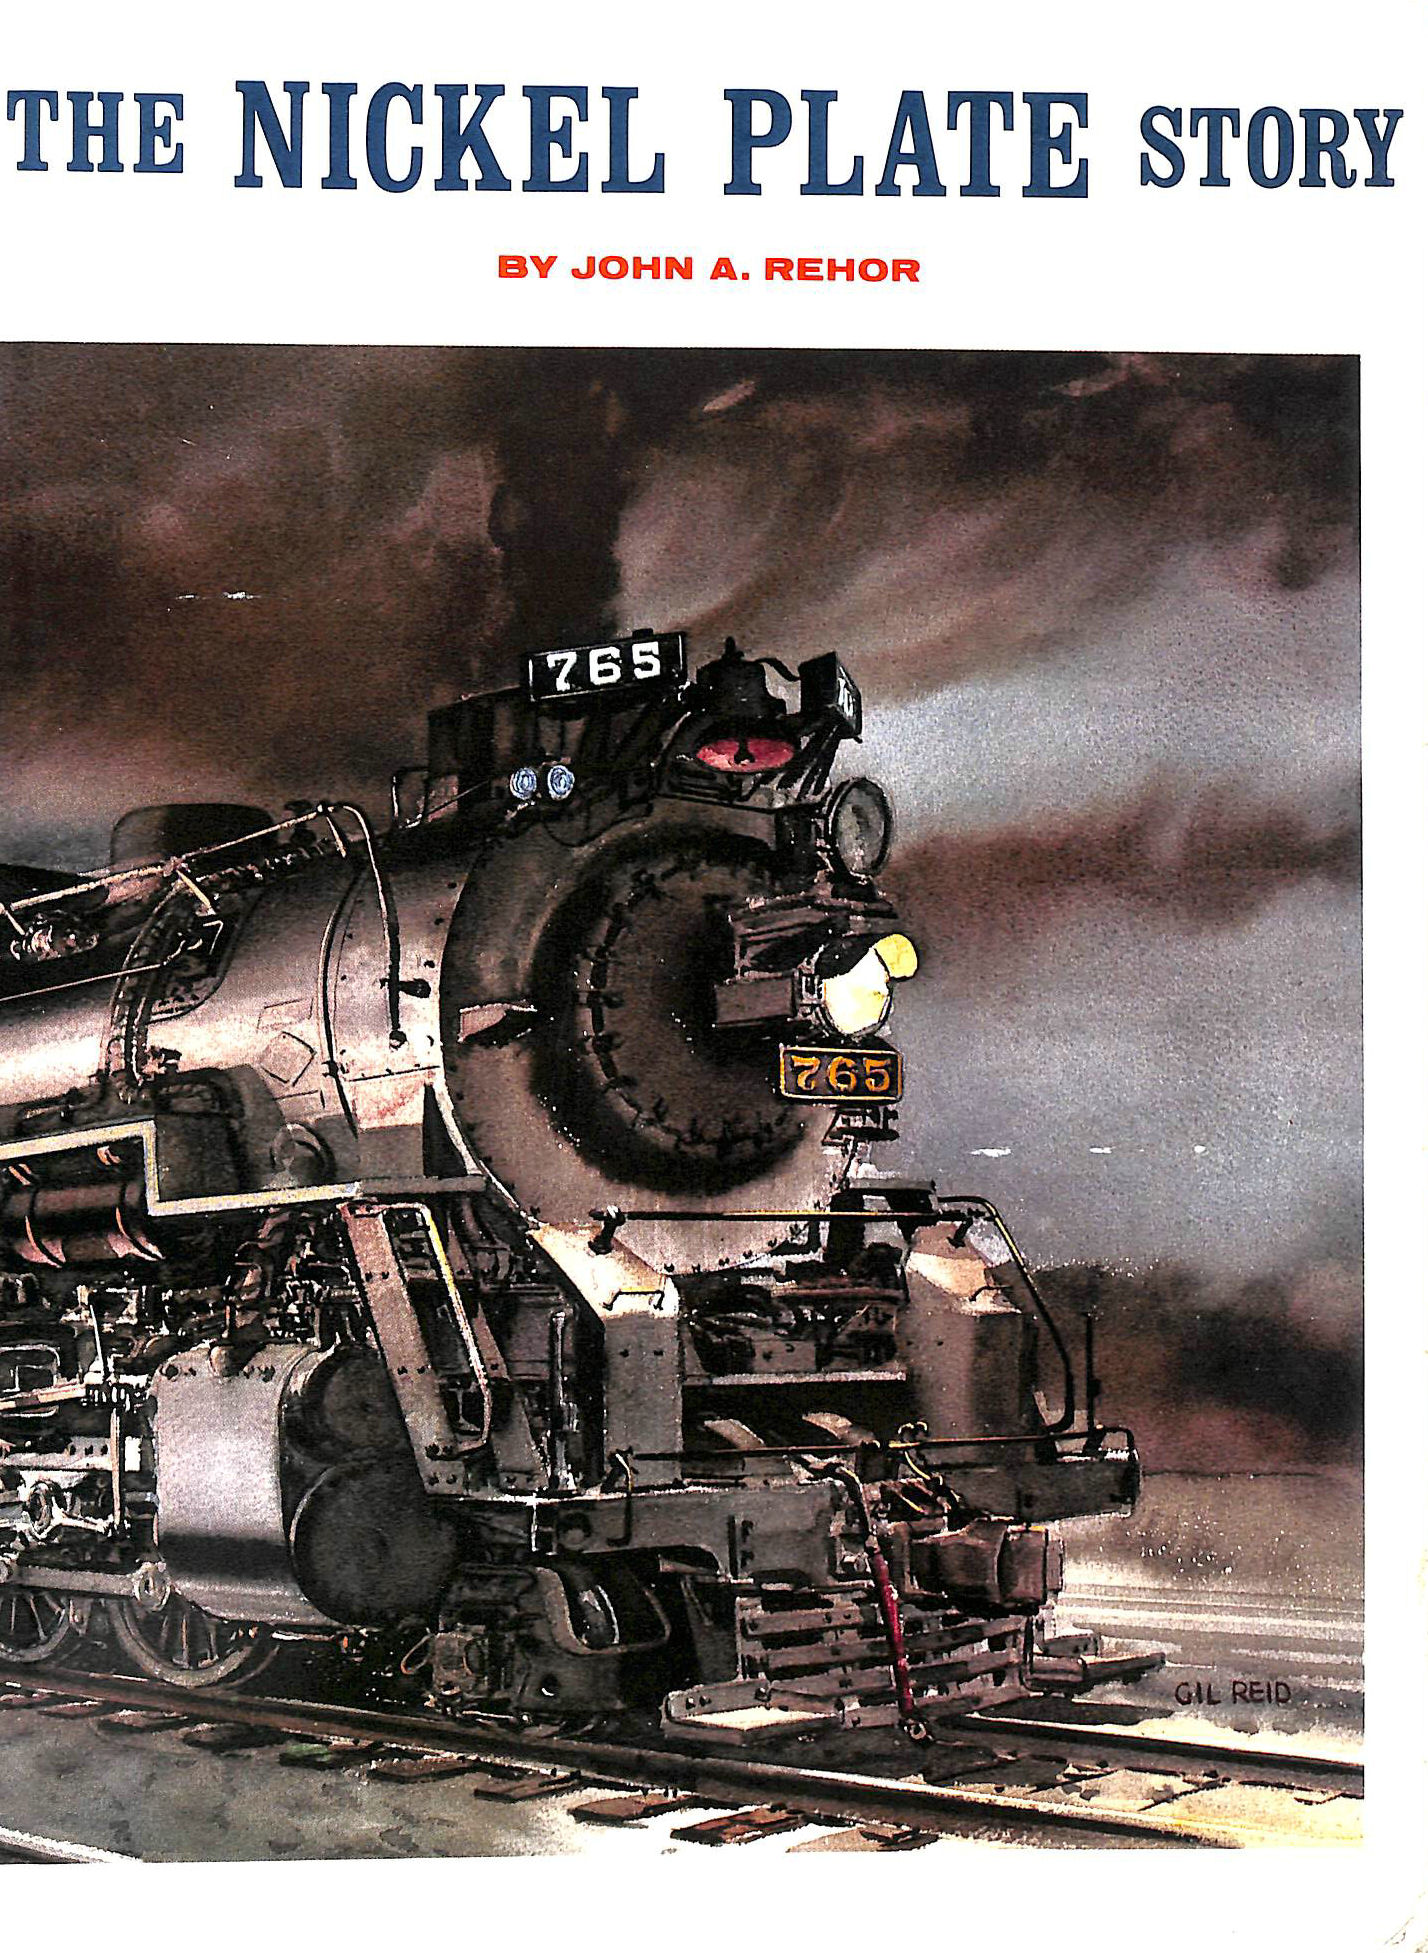 REHOR, JOHN A. - The Nickel Plate Story